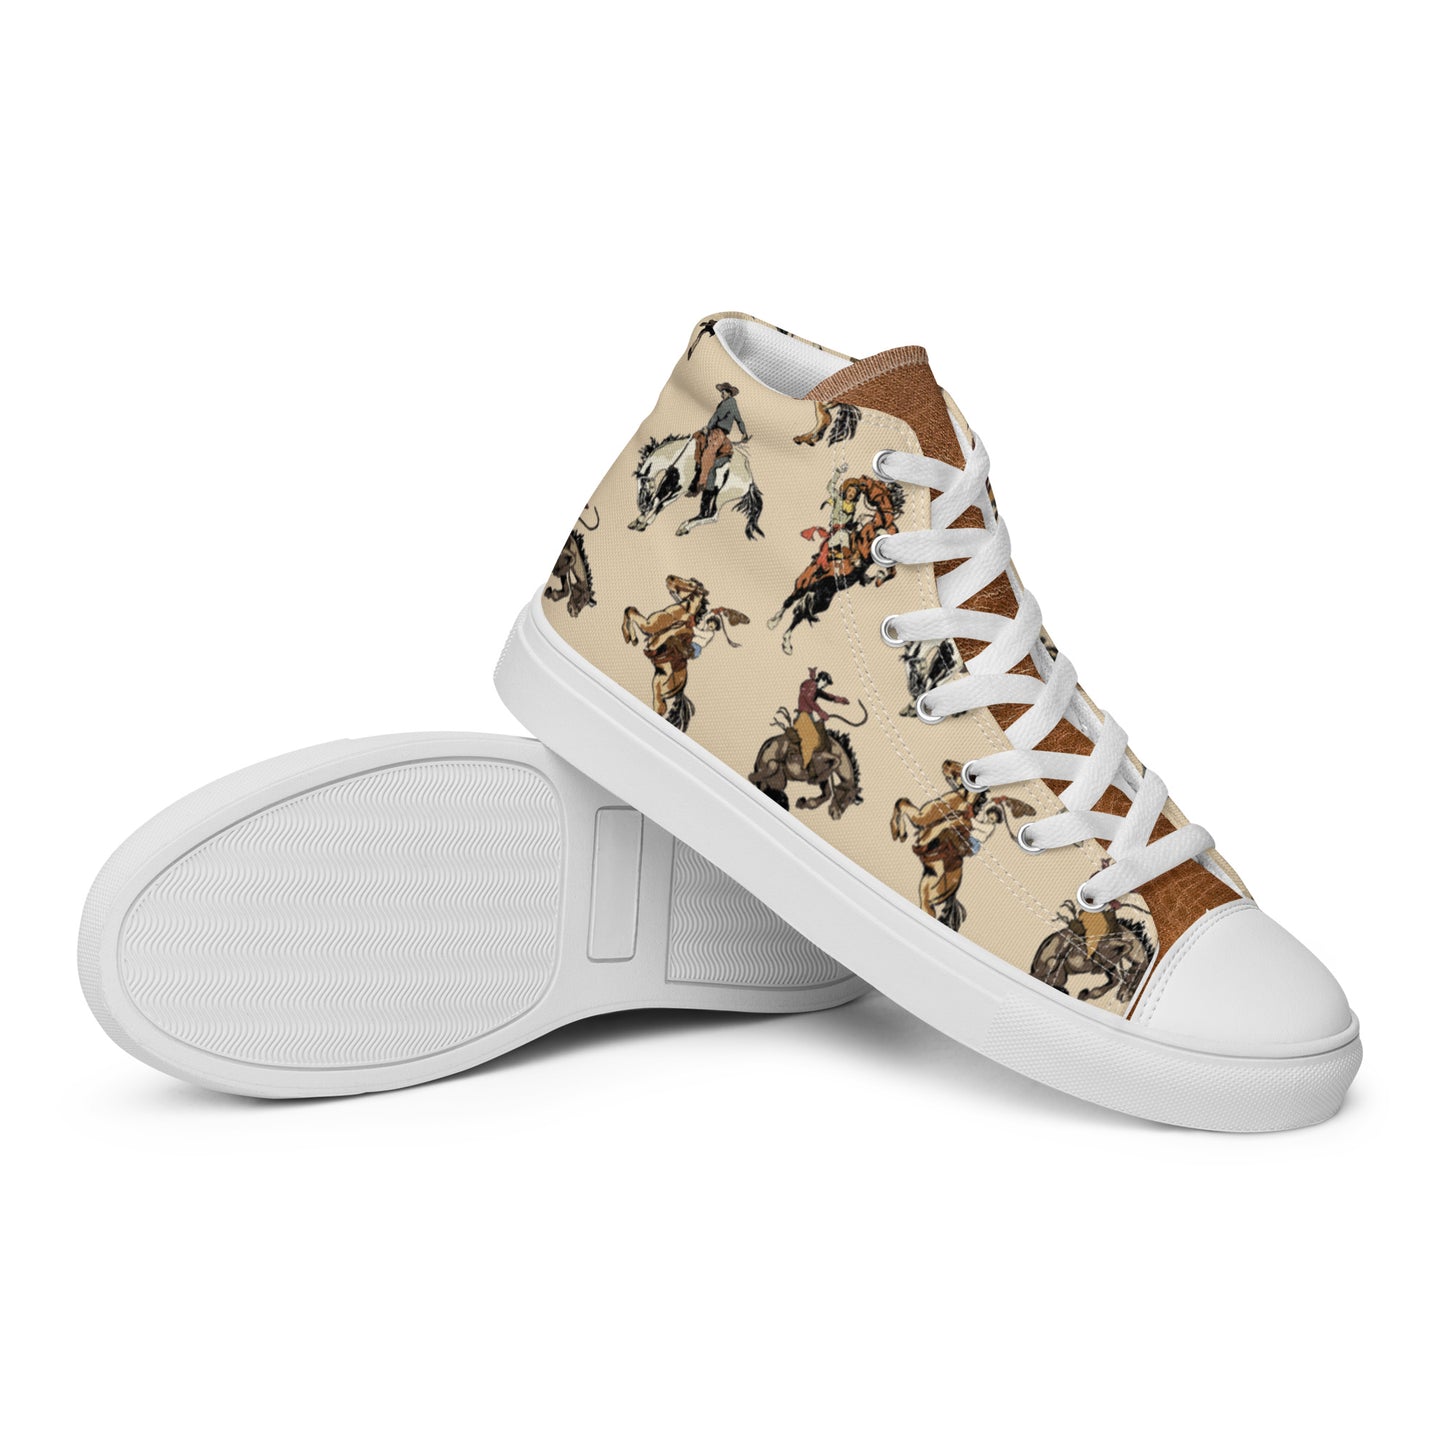 Vintage Cowgirl Women’s high top canvas shoes - baha ranch, canvas, cowgirl, high tops, hightop shoes, shoe, shoes, vintage, vintage cowgirl -  - Baha Ranch Western Wear